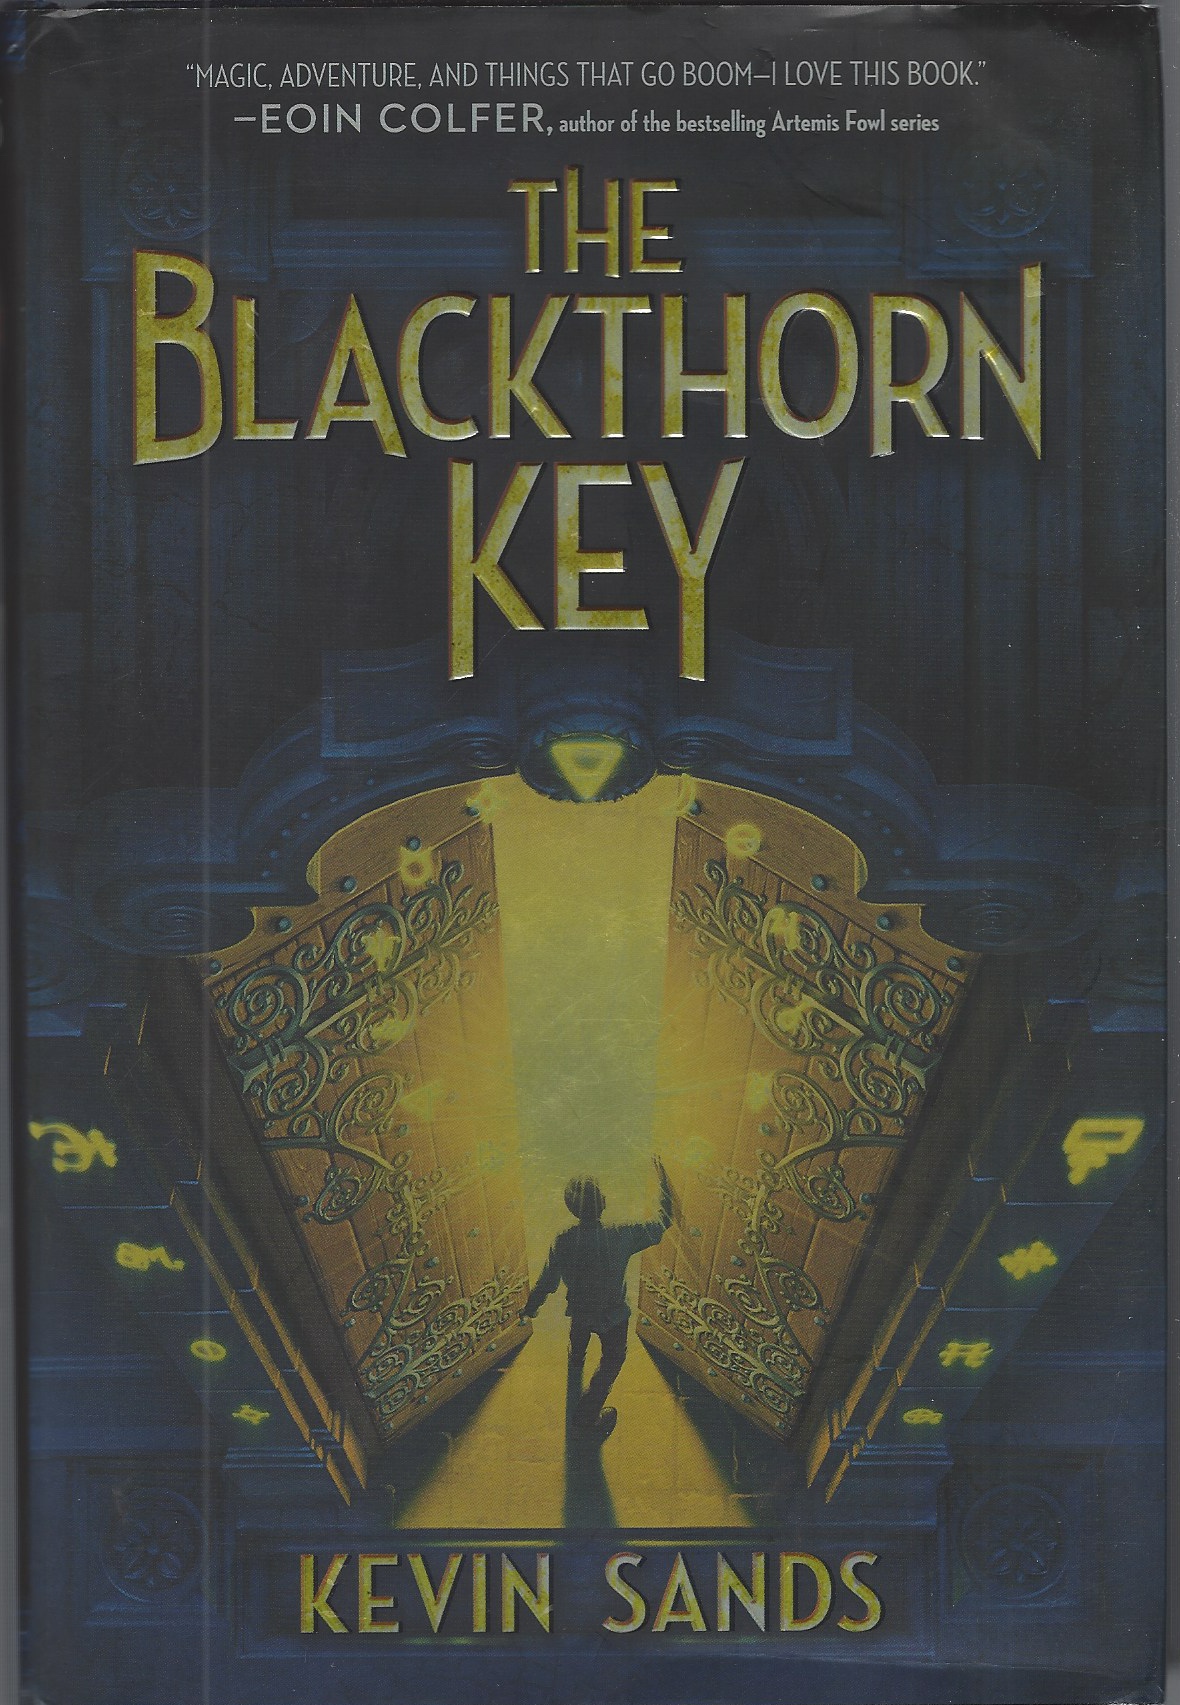 SANDS, KEVIN - Blackthorn Key, Book One of the Blackthorn Key Series